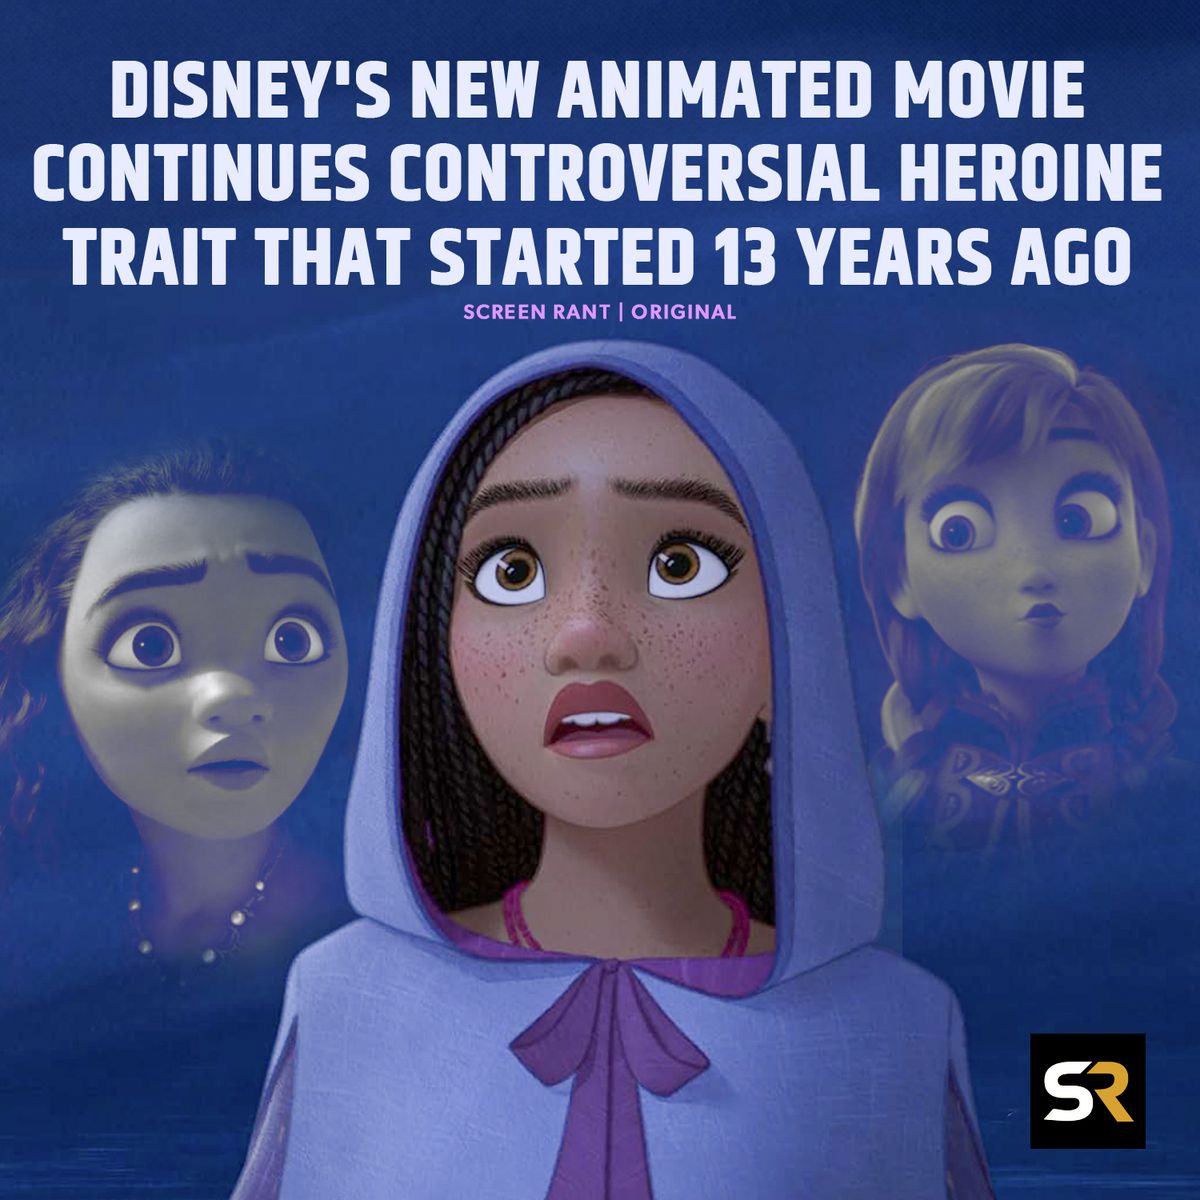 What do you think of this controversial move by Disney